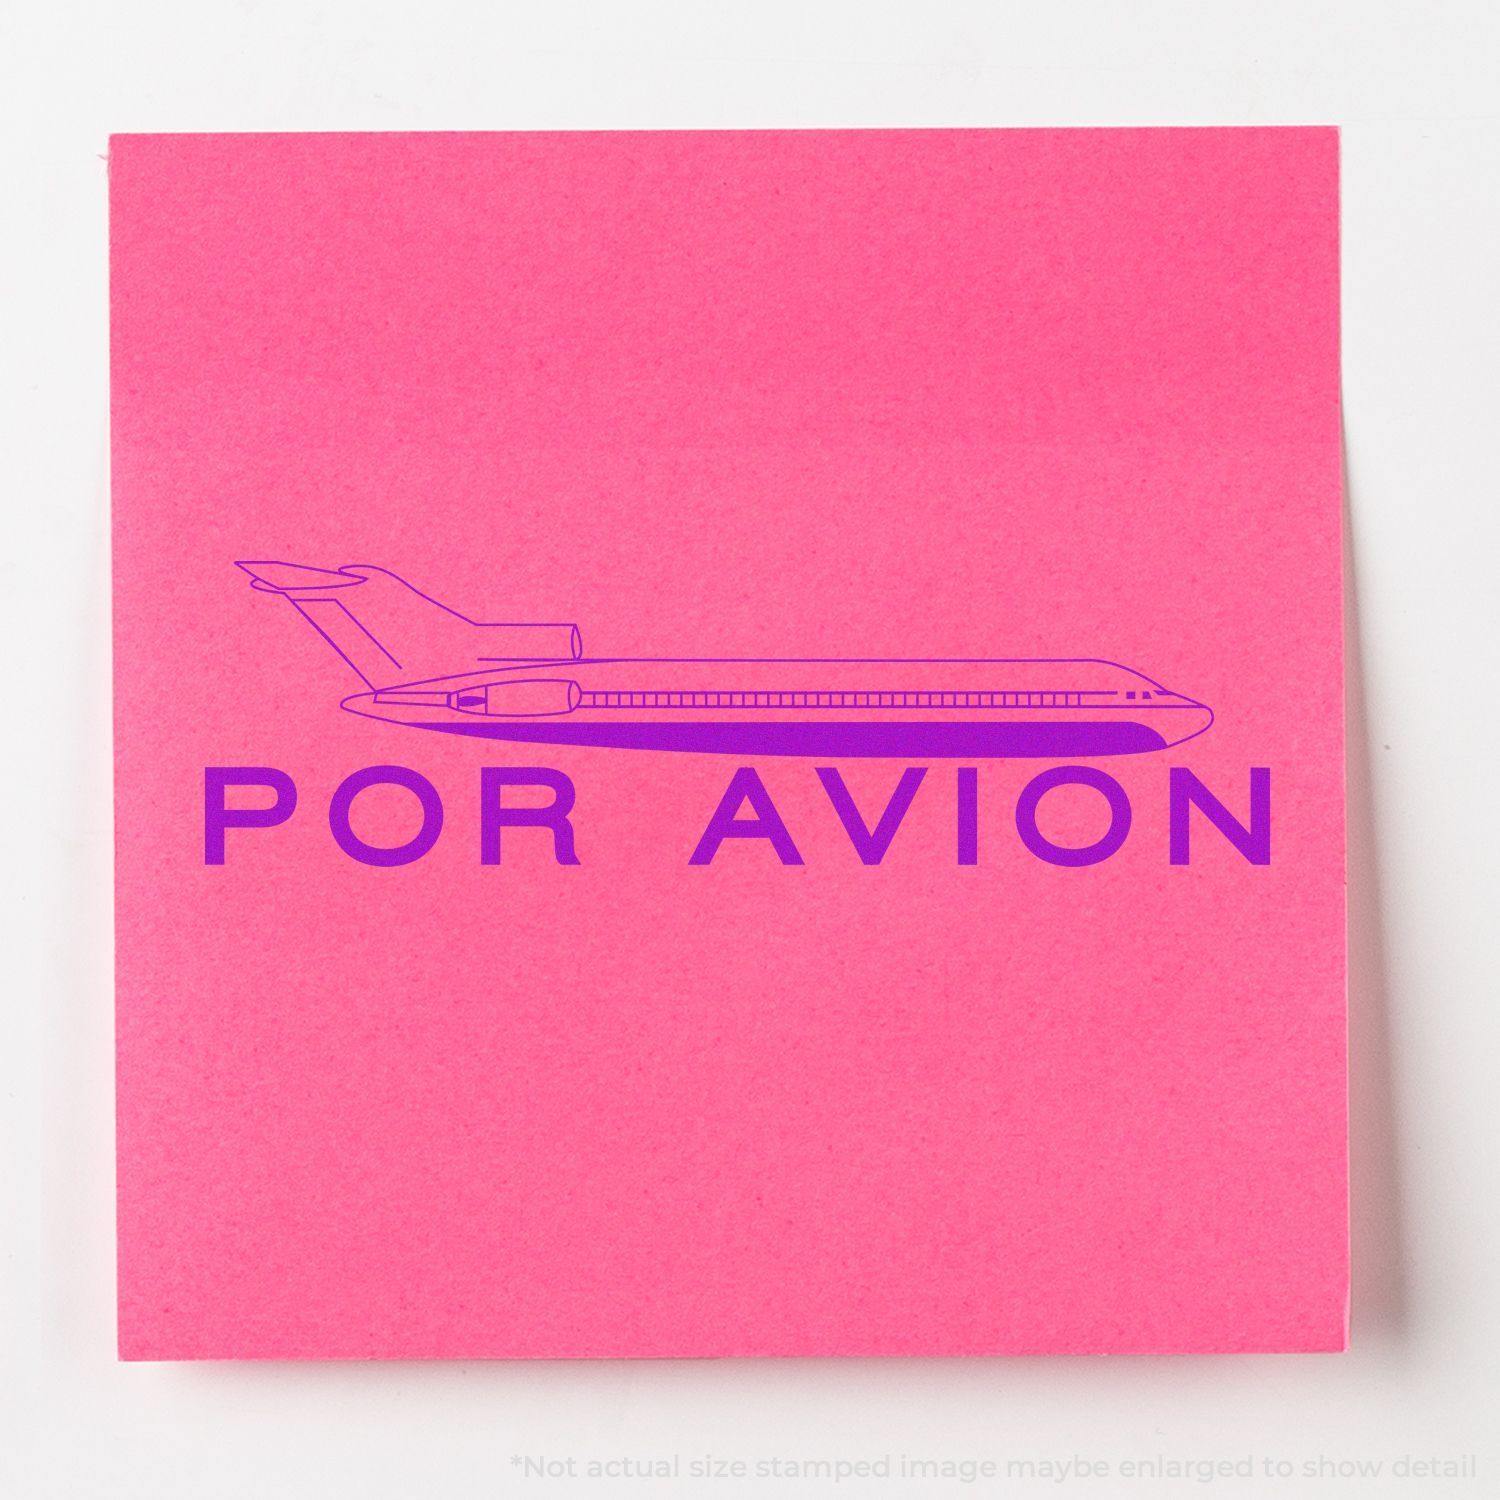 A stock office rubber stamp with a stamped image showing how the text "POR AVION" in a large bold font with an airplane icon above the text is displayed after stamping.